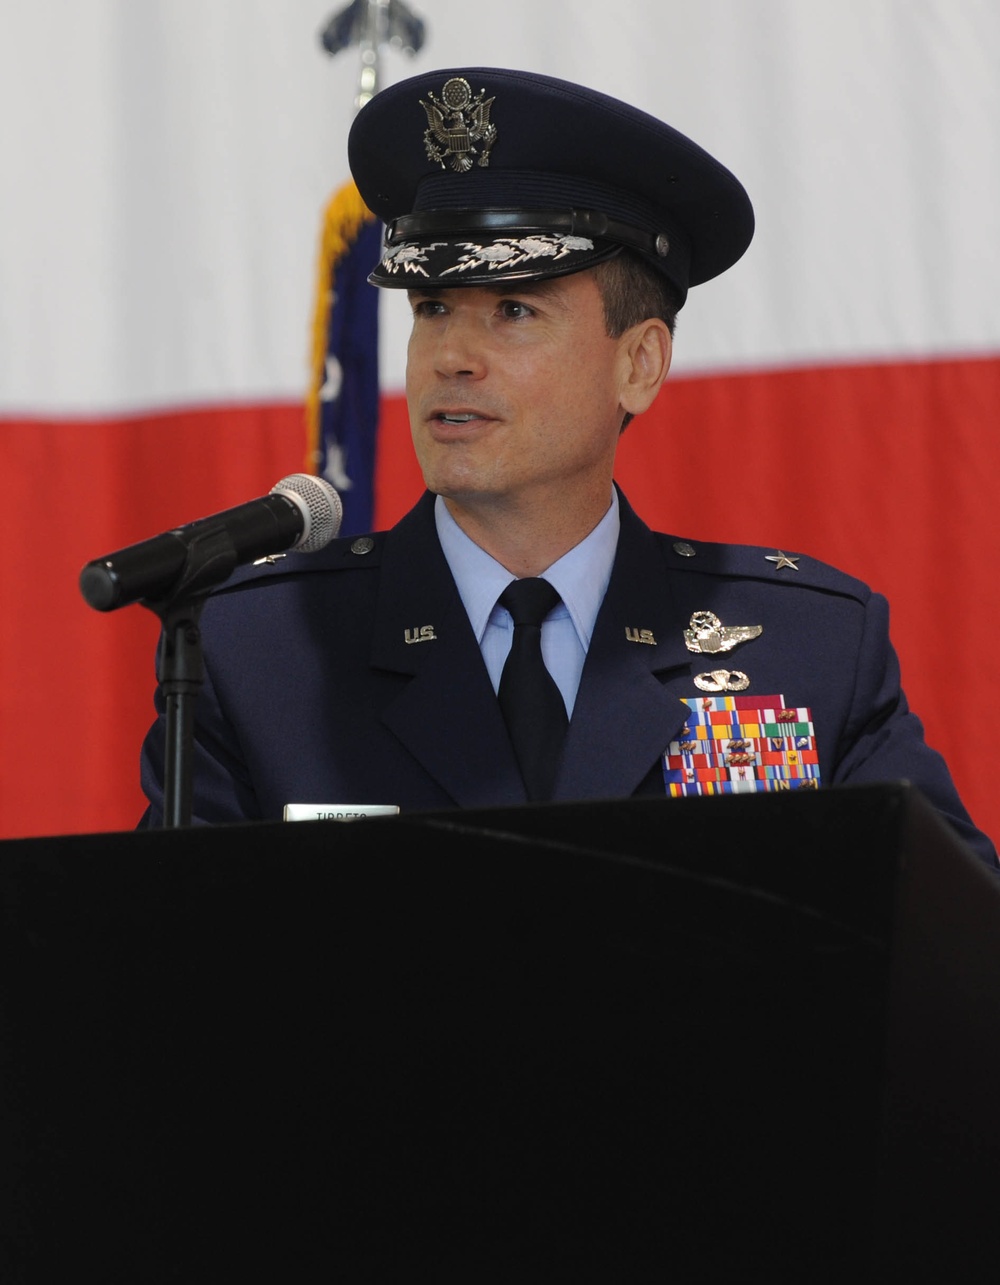 Continuing the legacy: Tibbets takes command of 509th Bomb Wing